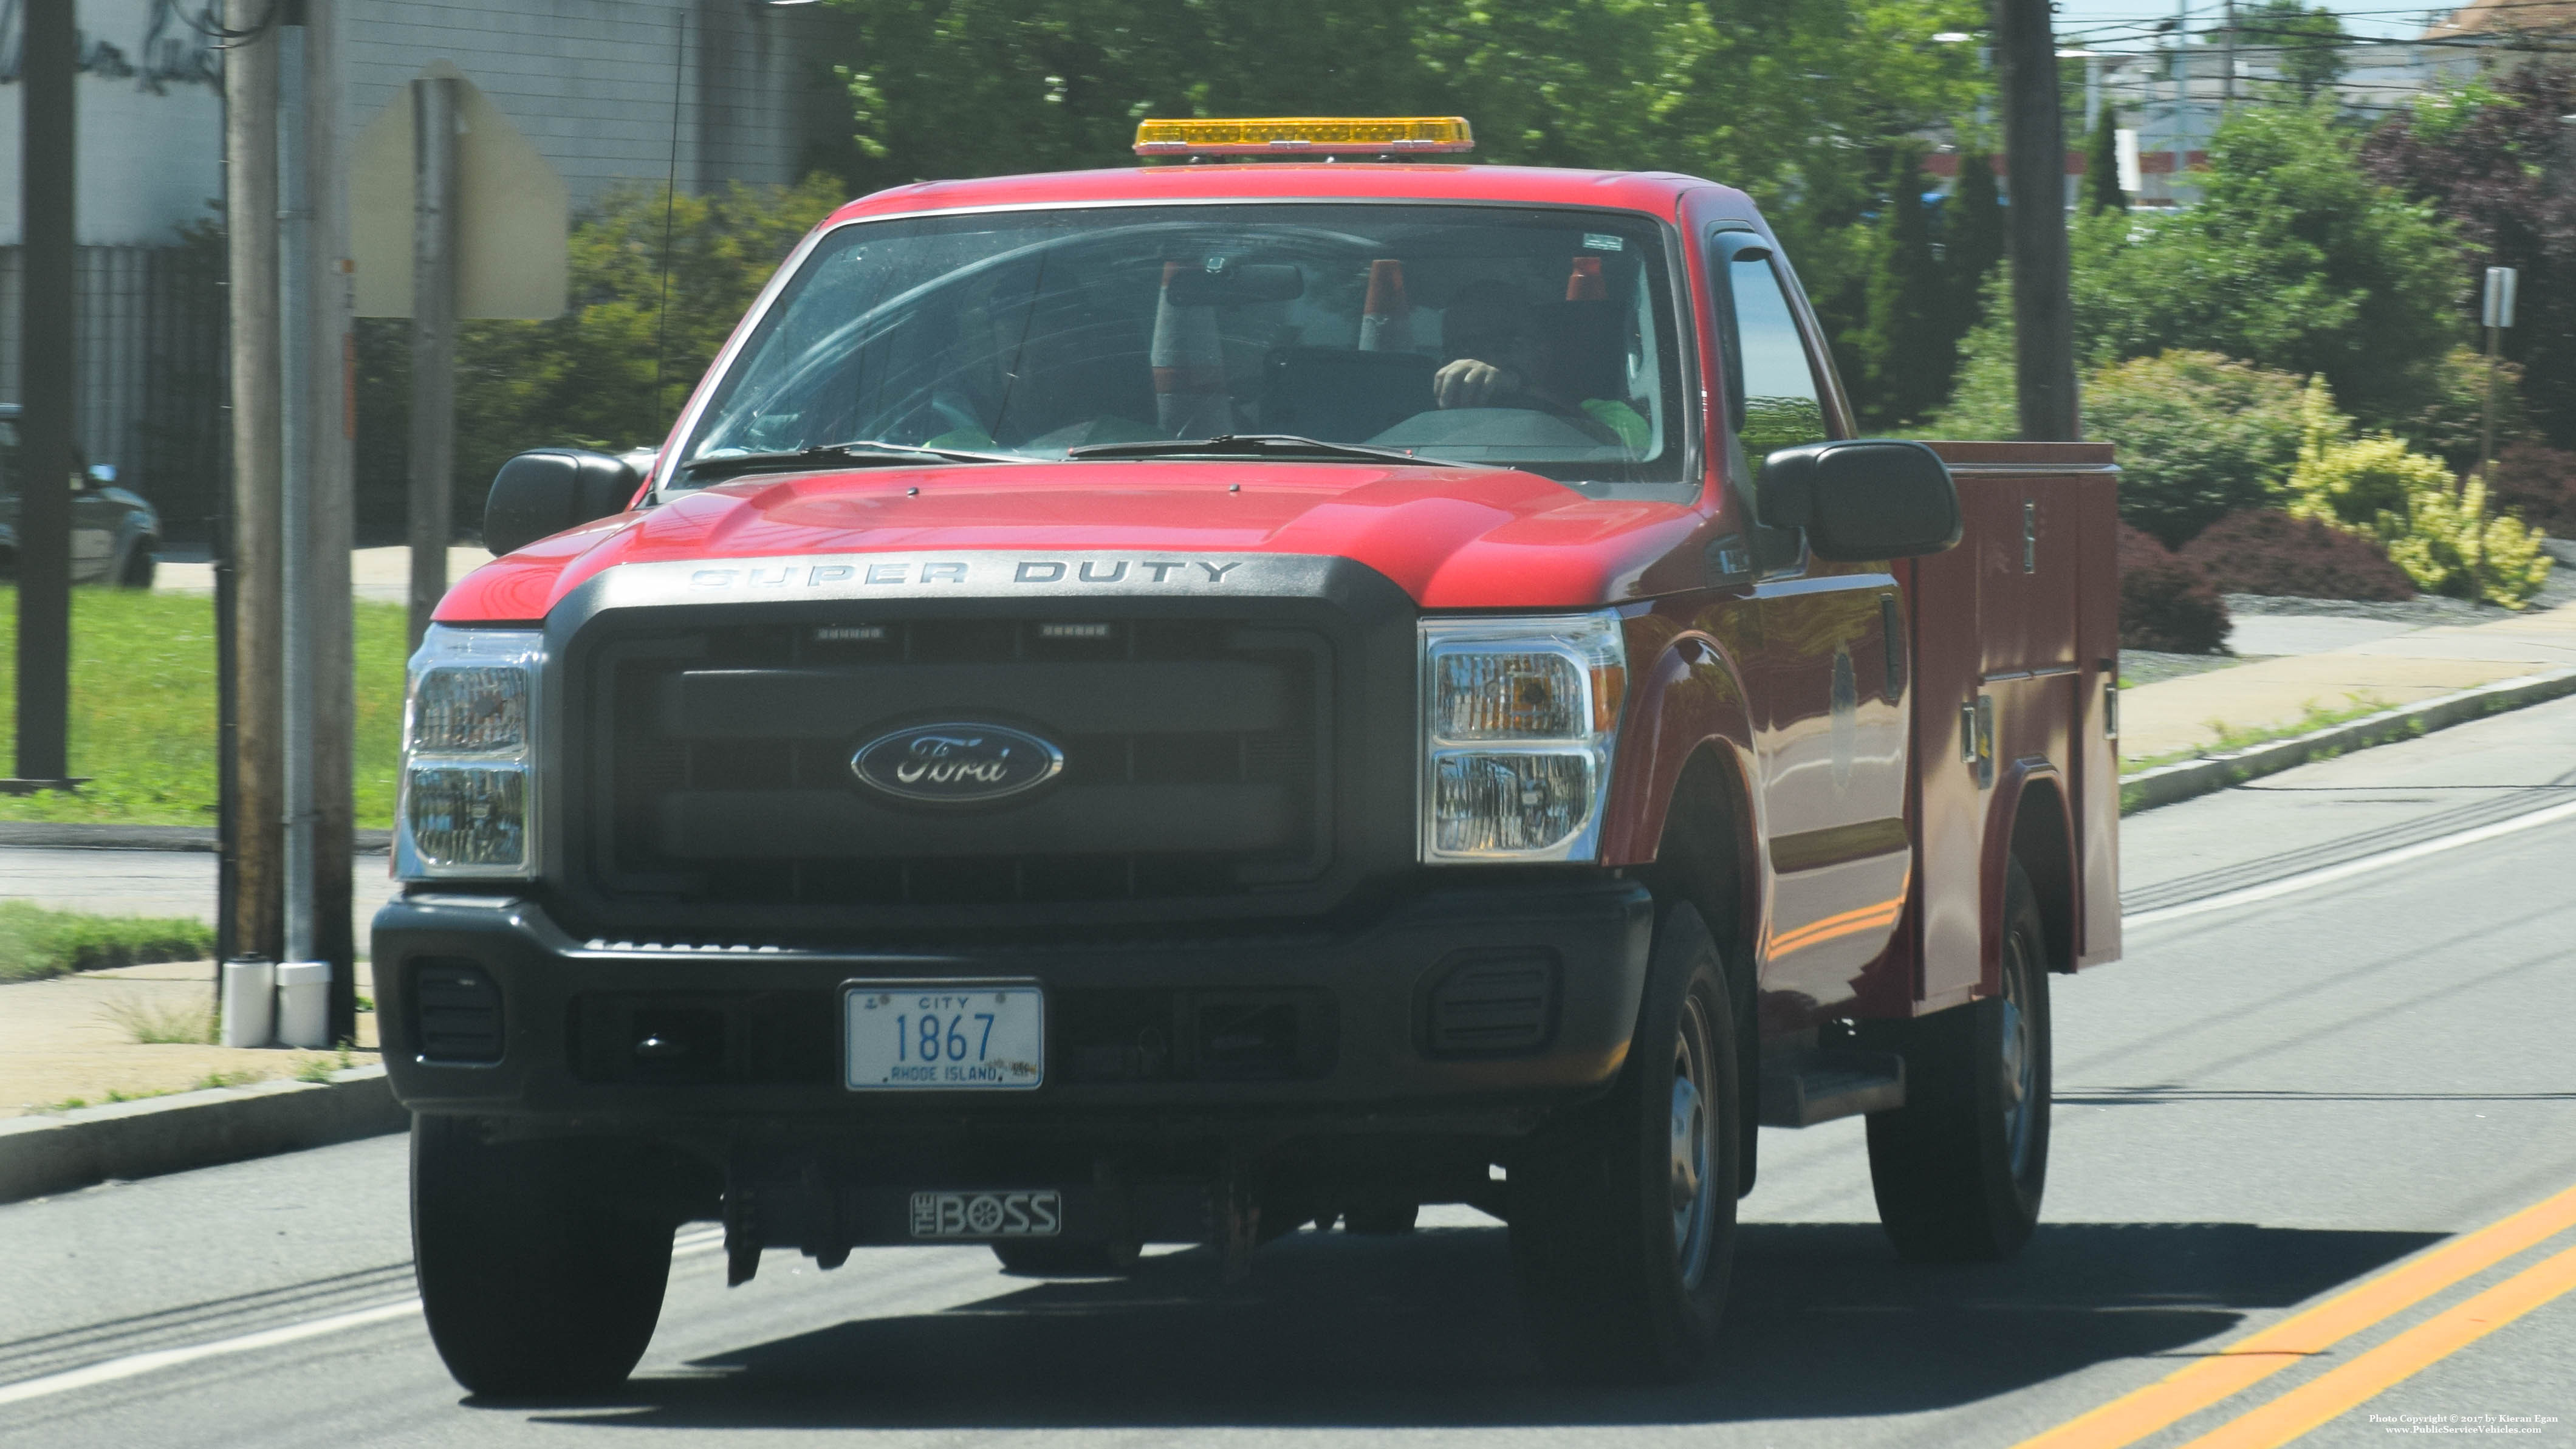 A photo  of East Providence Highway Division
            Truck 1867, a 2011-2016 Ford F-250             taken by Kieran Egan